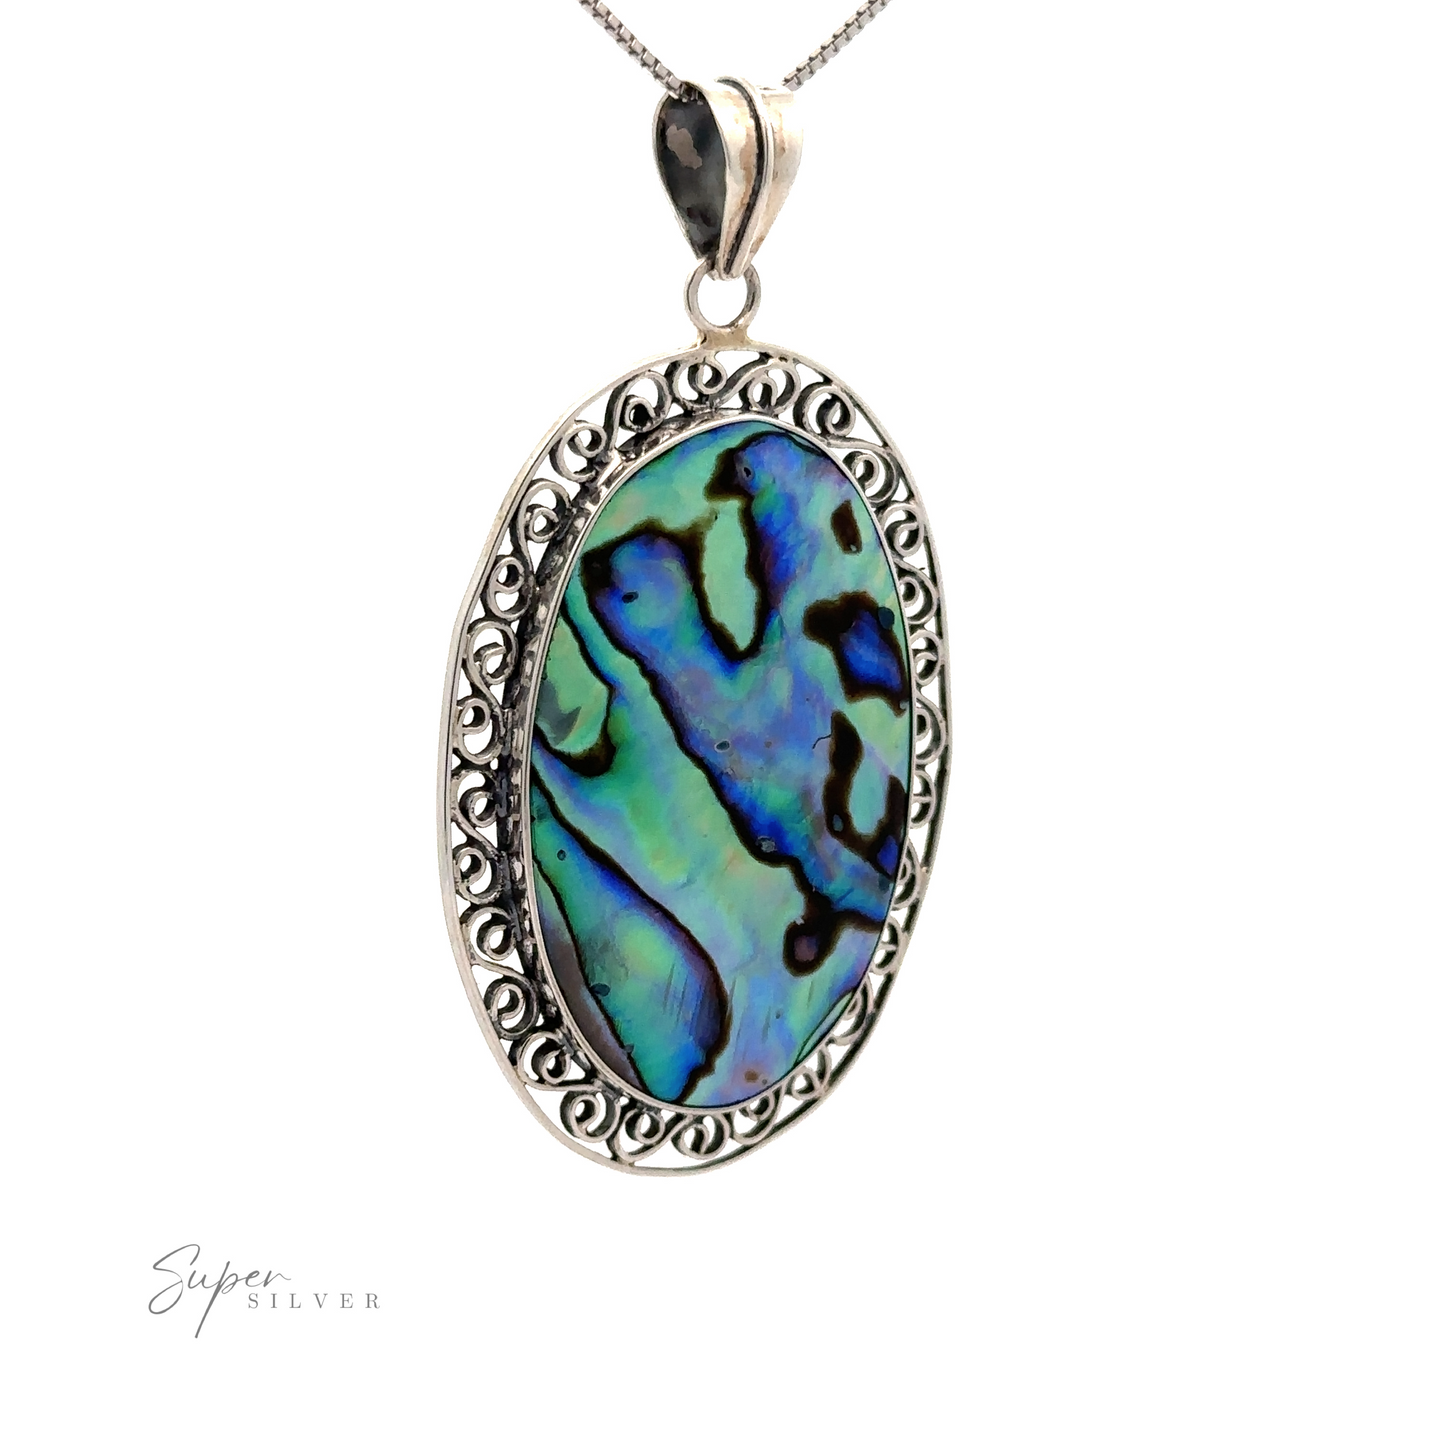 
                  
                    An Oval Abalone Pendant with Filigree Border featuring a greenish-blue shell encased in an ornate sterling silver filigree setting, hanging from a silver chain. The pendant has intricate detailing around the shell.
                  
                